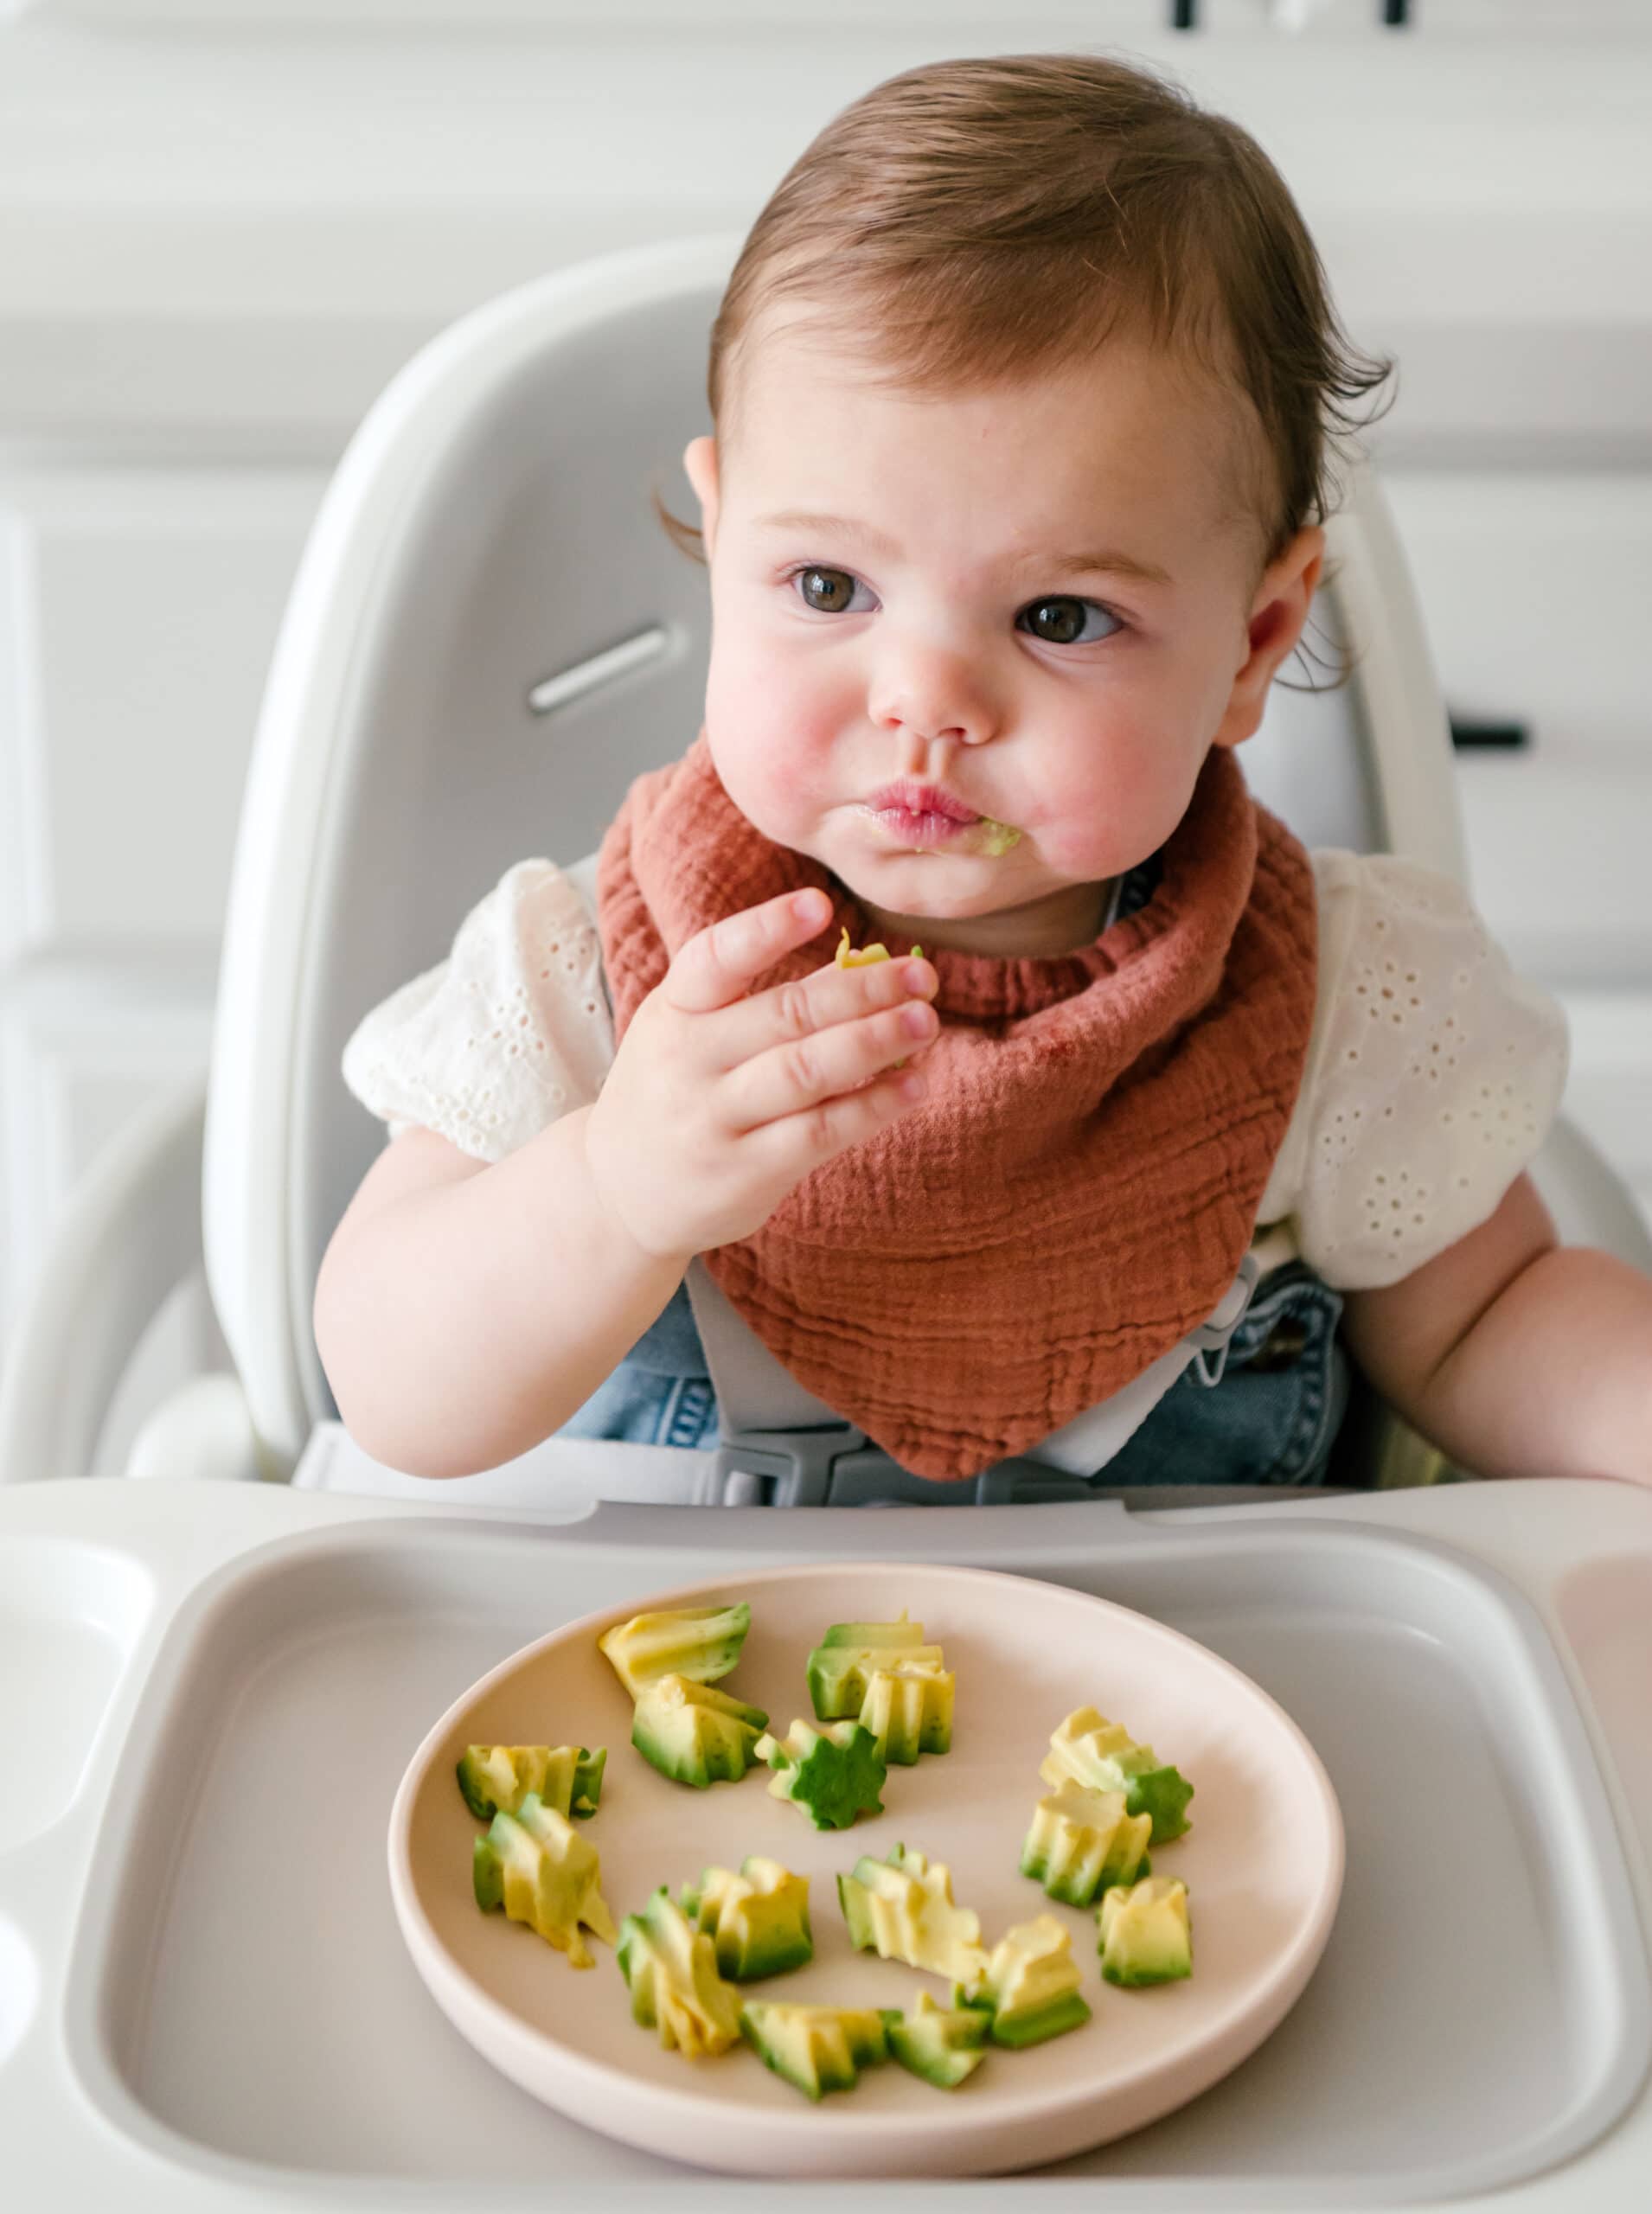 Baby eating avocado while sitting in high chair